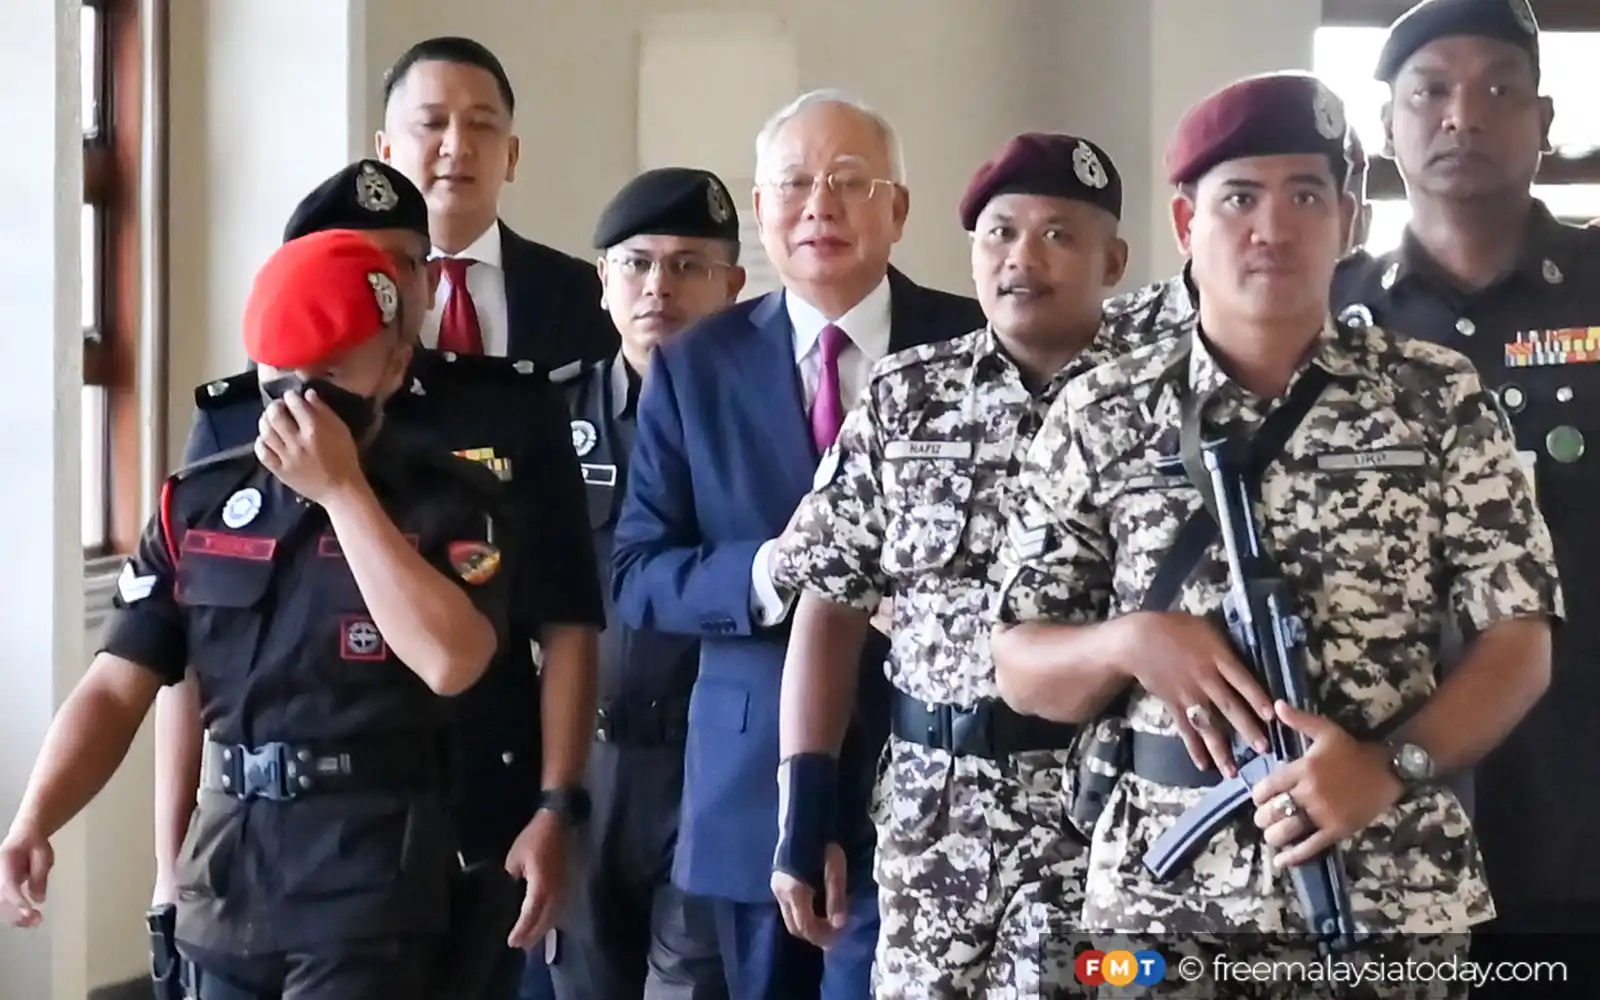 Court to rule on Najib’s ‘supplementary order’ challenge on June 5